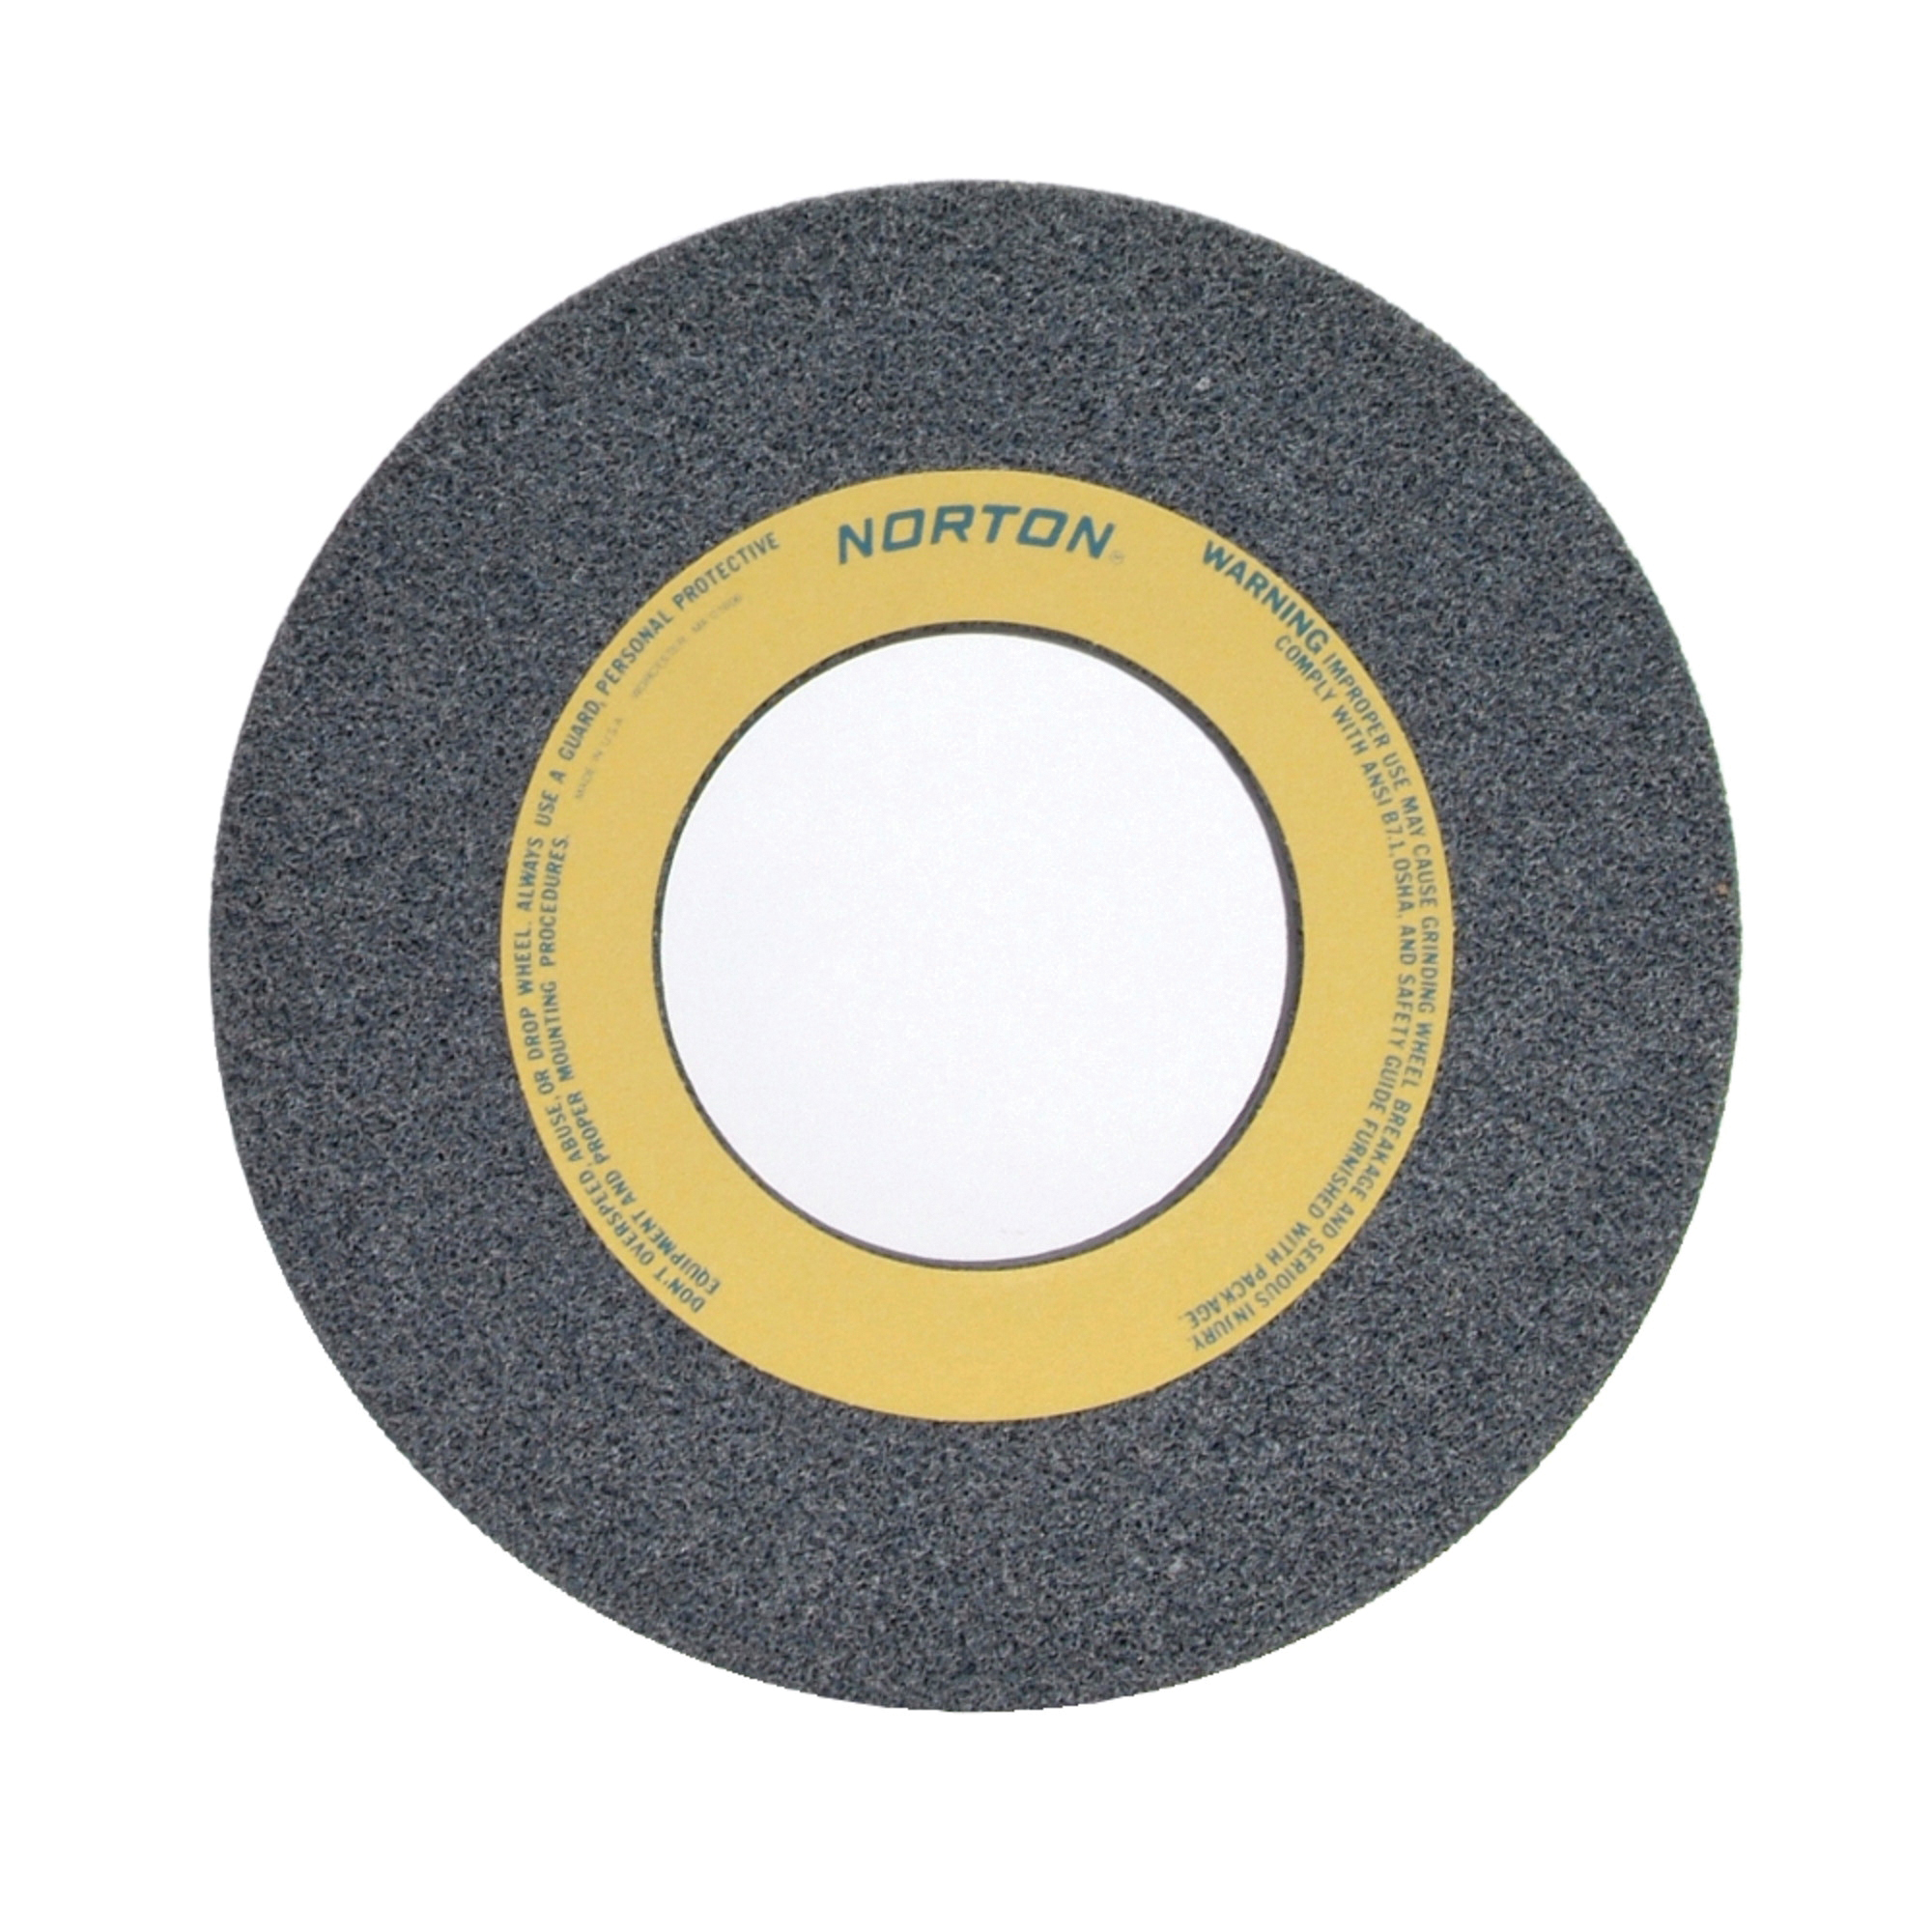 Norton® 66253262841 32A Straight Toolroom Wheel, 12 in Dia x 1 in THK, 5 in Center Hole, 46 Grit, Aluminum Oxide Abrasive